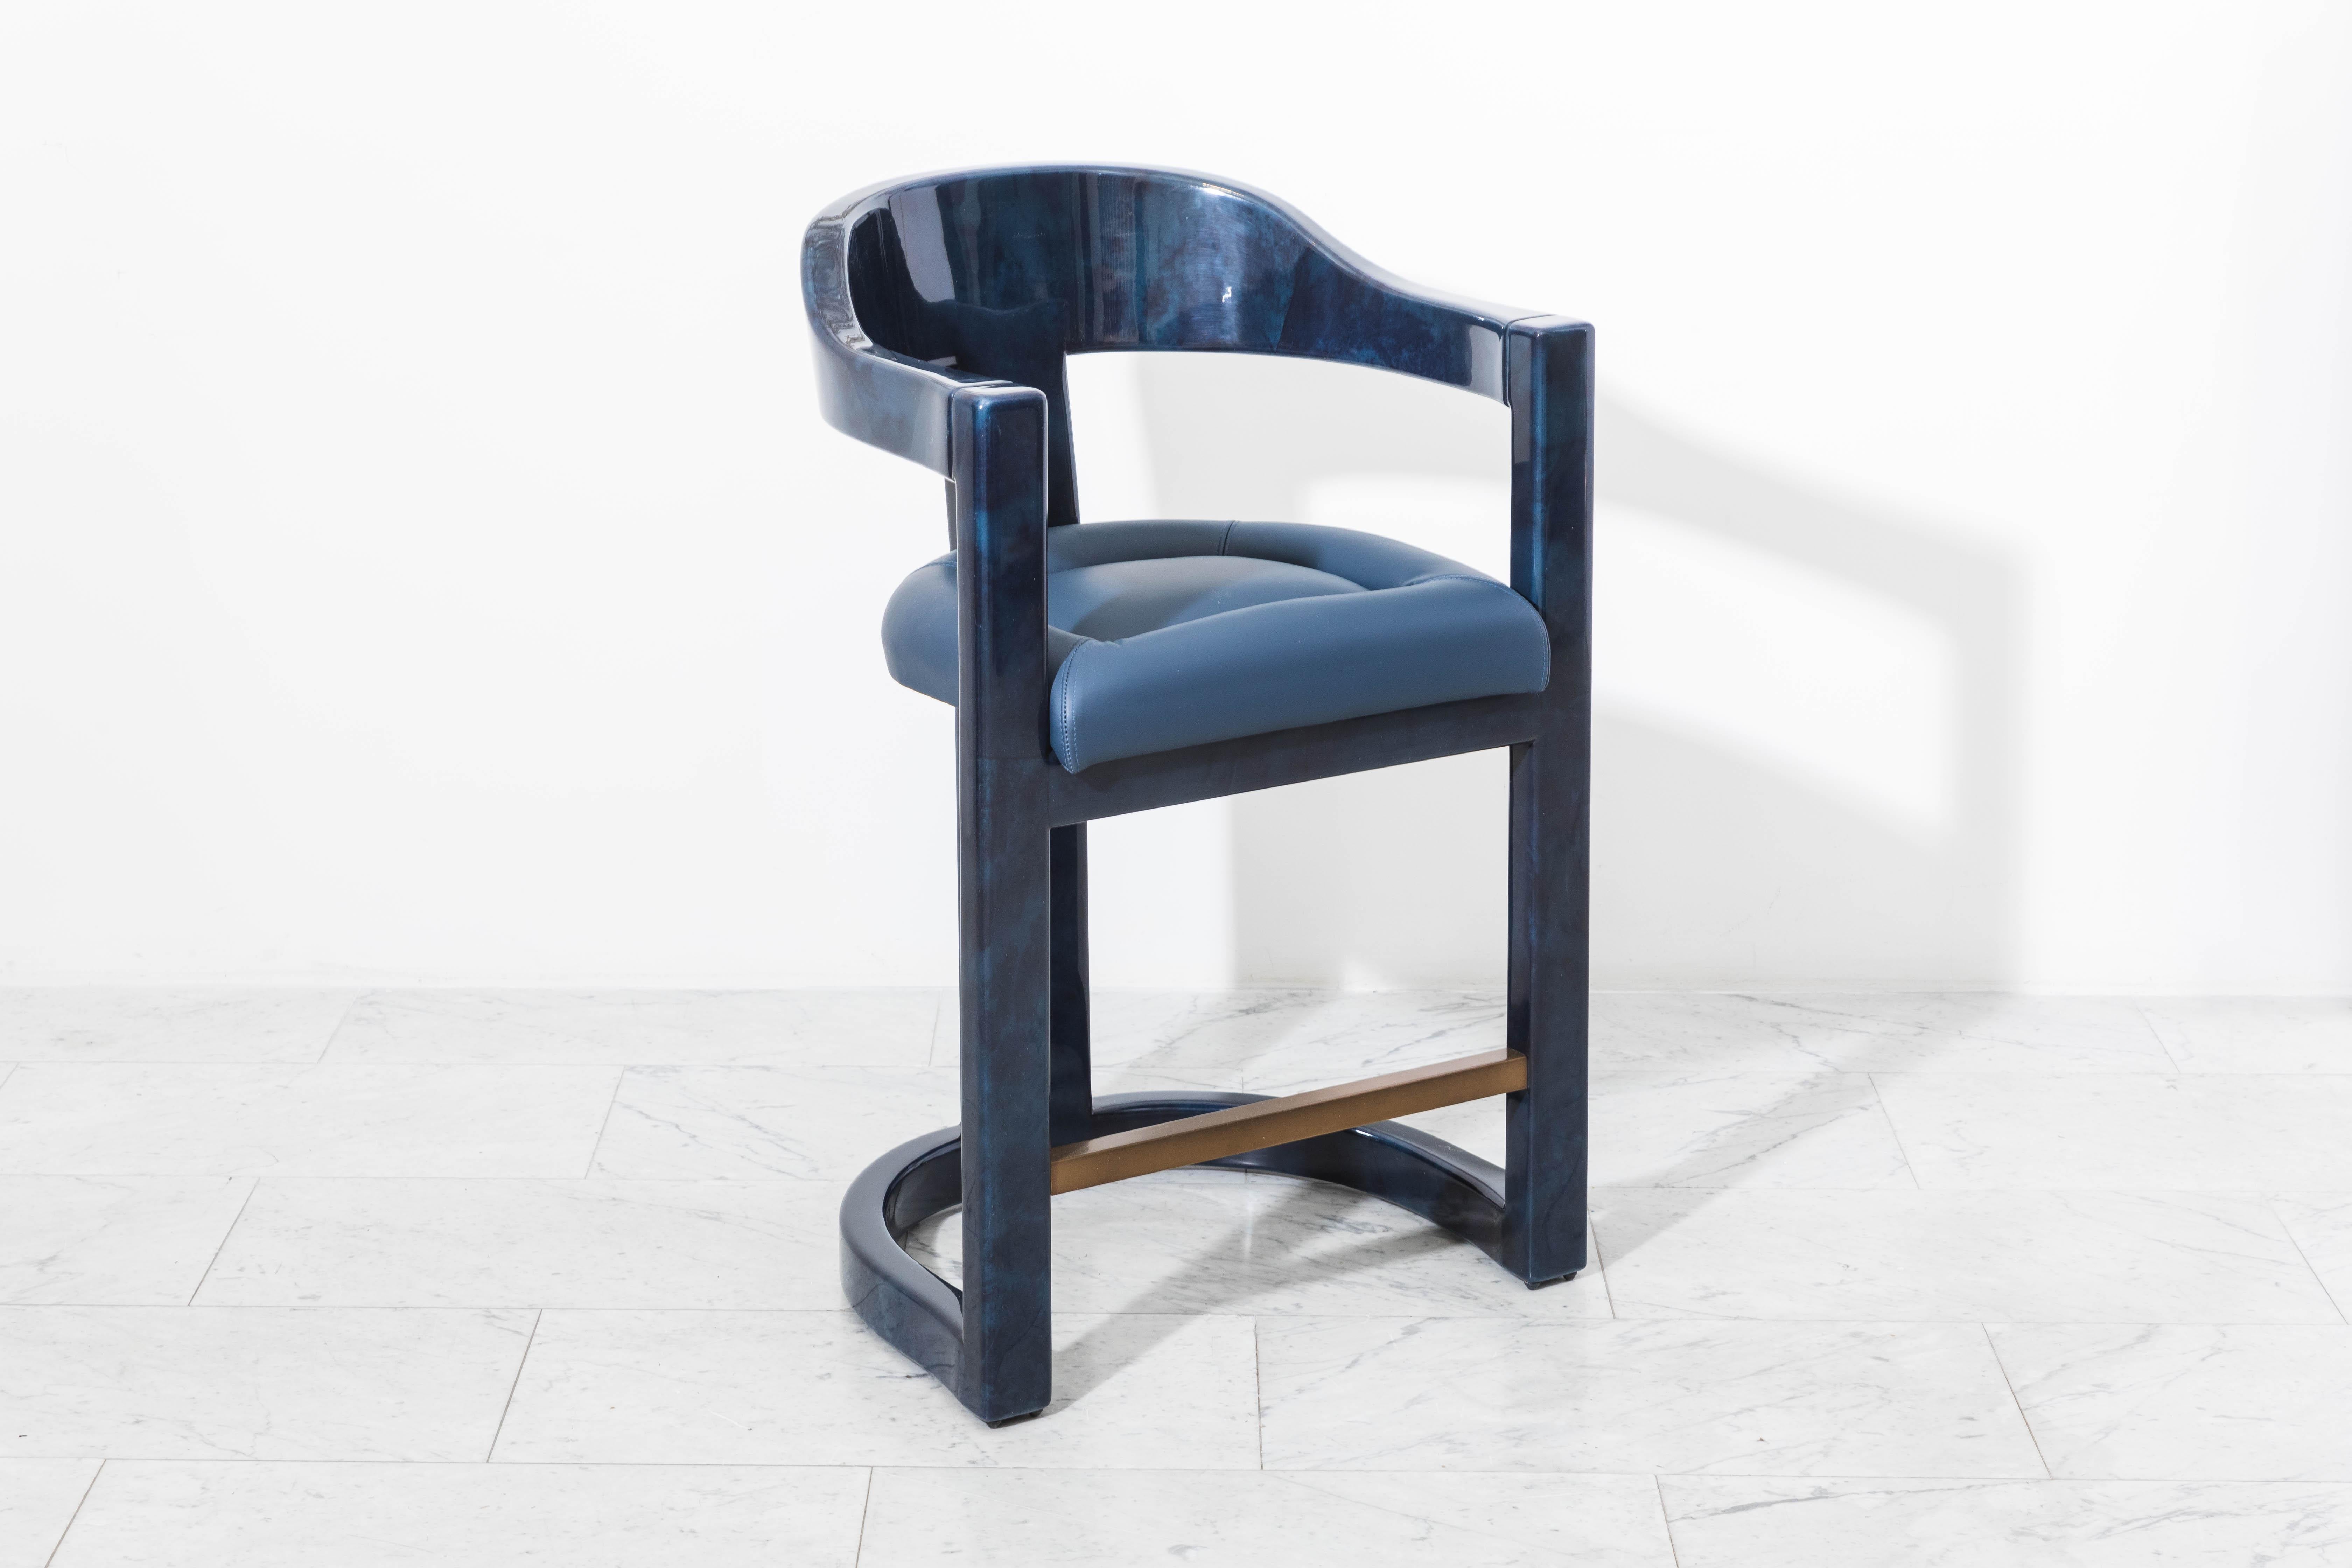 An iconic form by Karl Springer, the Onassis barstools are now available through Karl Springer LTD exclusively at Todd Merrill Studio. The stools feature a barrel back with semi circular arm rests that embraces the body and a bronze footrest. The